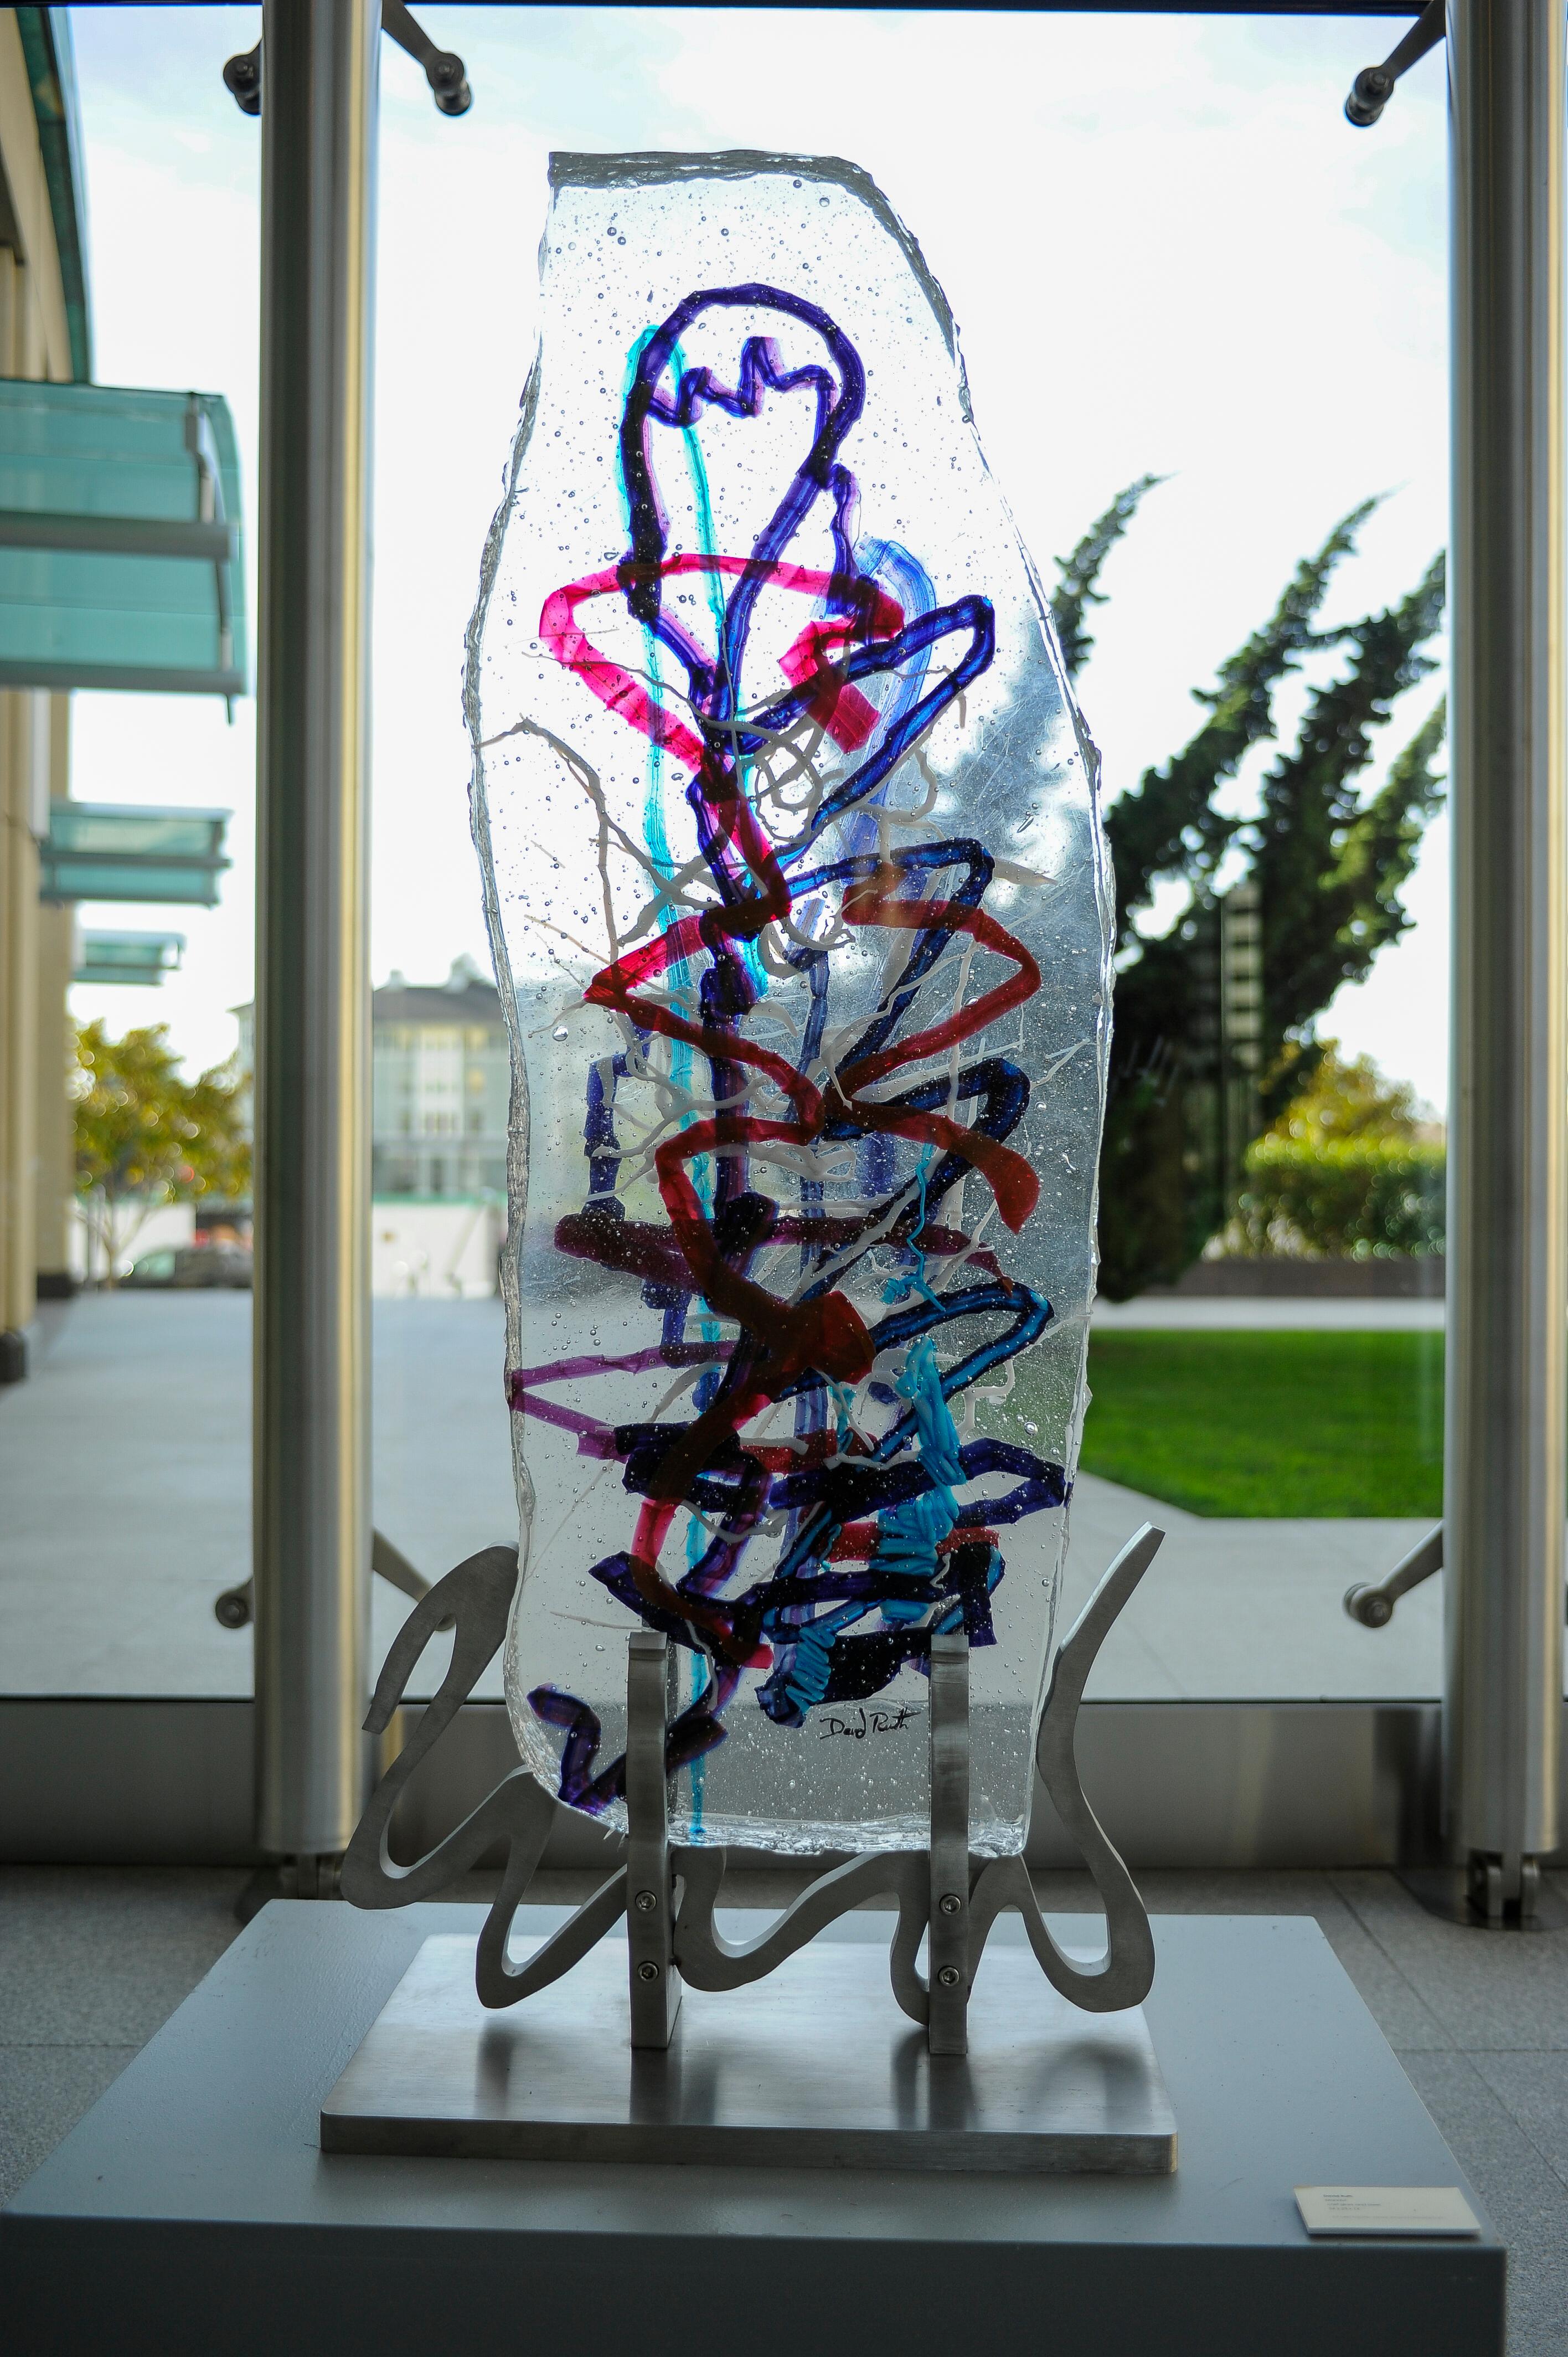 'Mandul' is a contemporary abstract cast glass sculpture by David Ruth from his Internal Space & Standing Stones series. It features painterly brushstroke formations in glass called trails. These trails of blue, black, red, white, and purple are